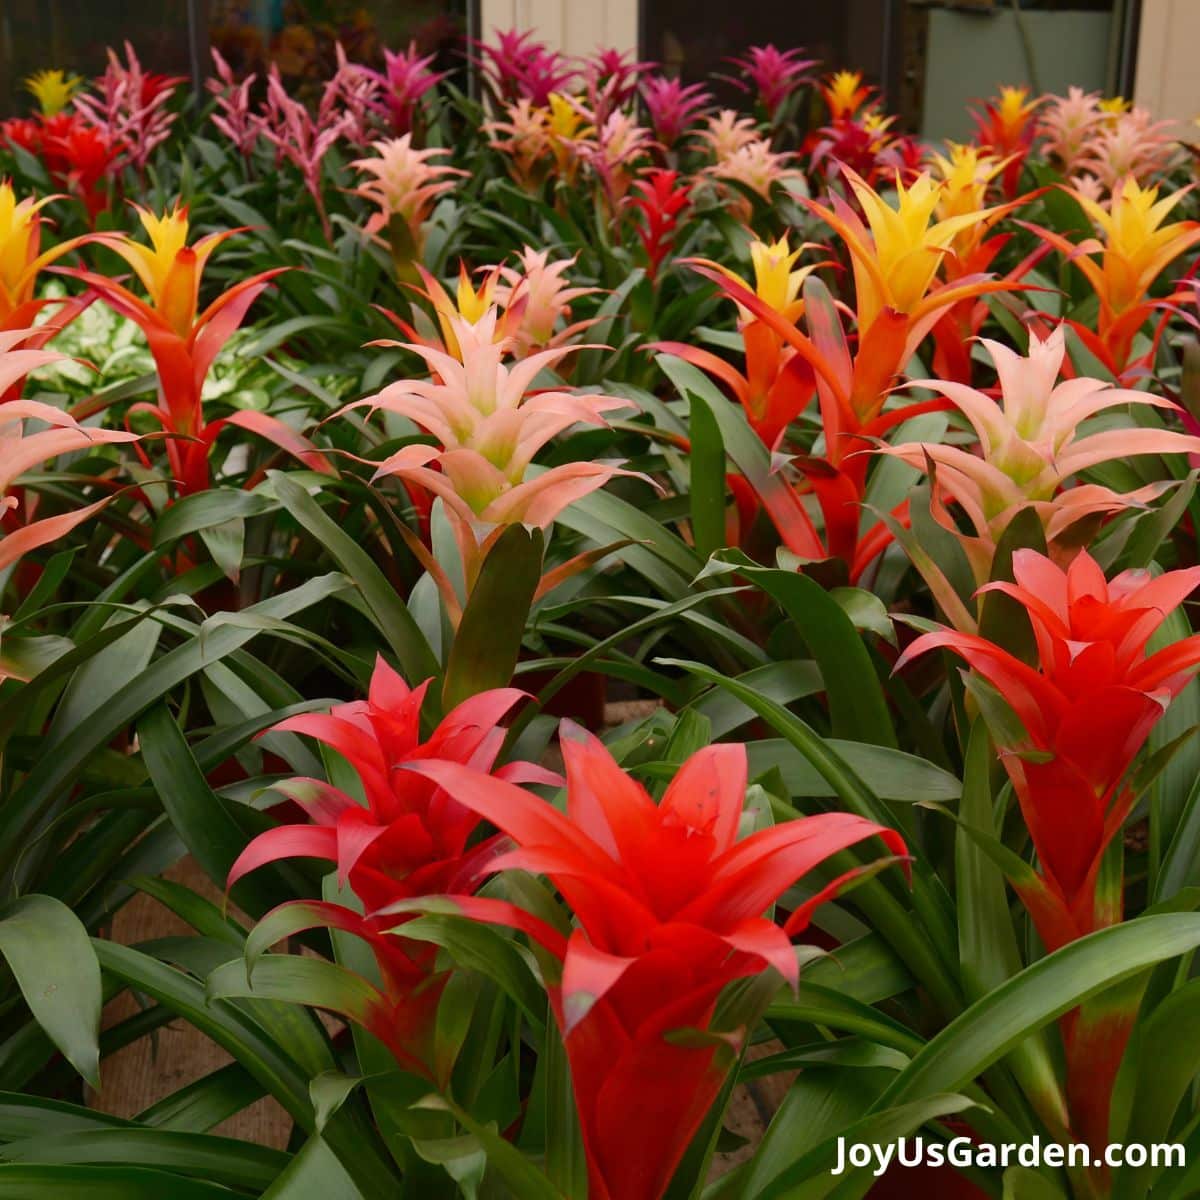 Bromeliads being sold in greenhouse, variety of colors shown, red, pinks, and yellows. 